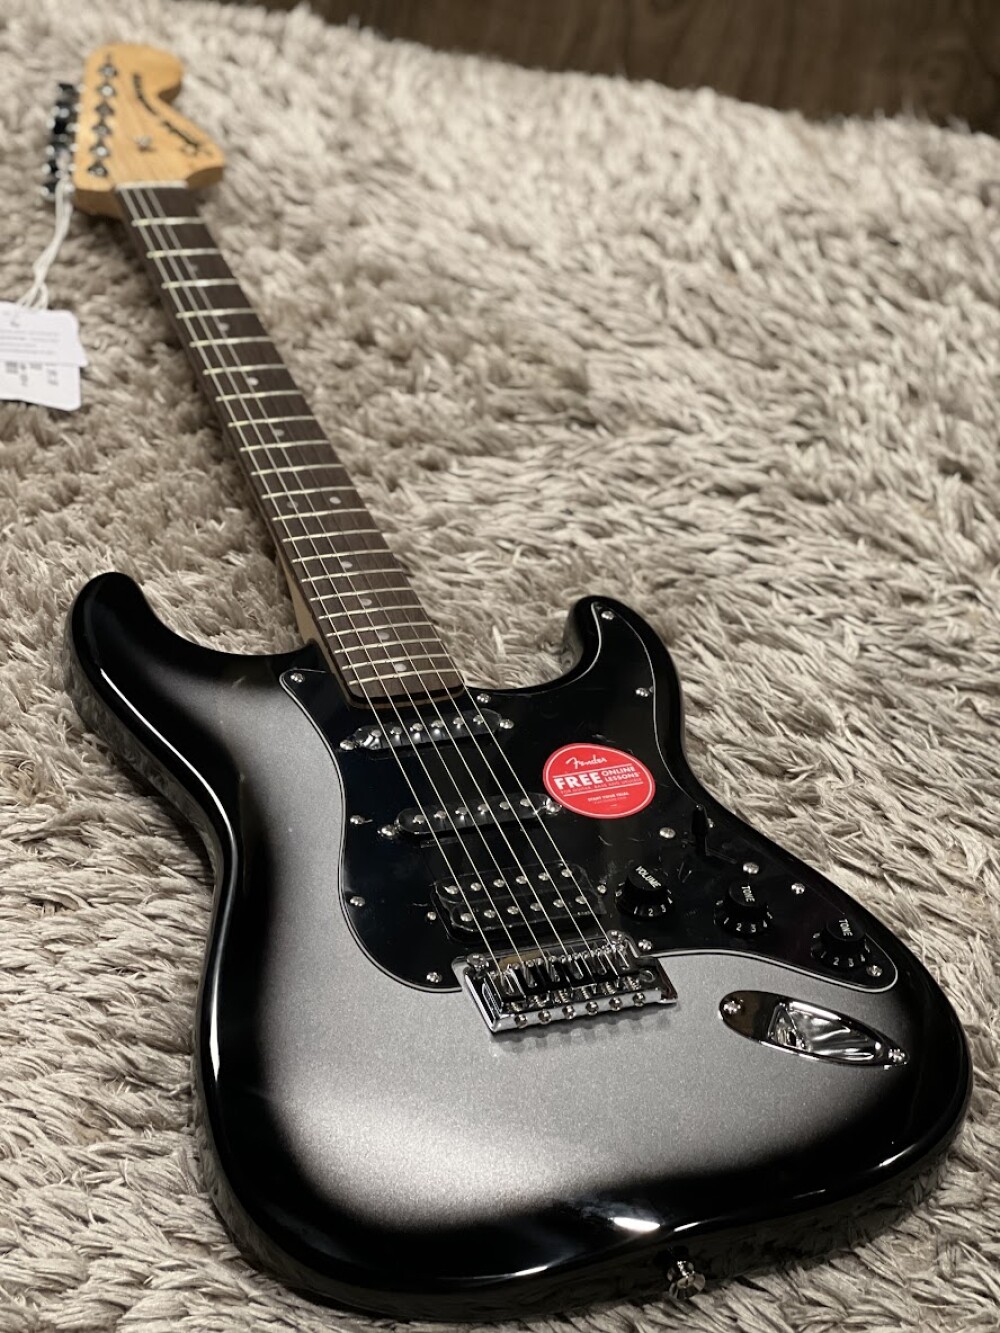 Squier by Fender California Series 希少？ - エレキギター